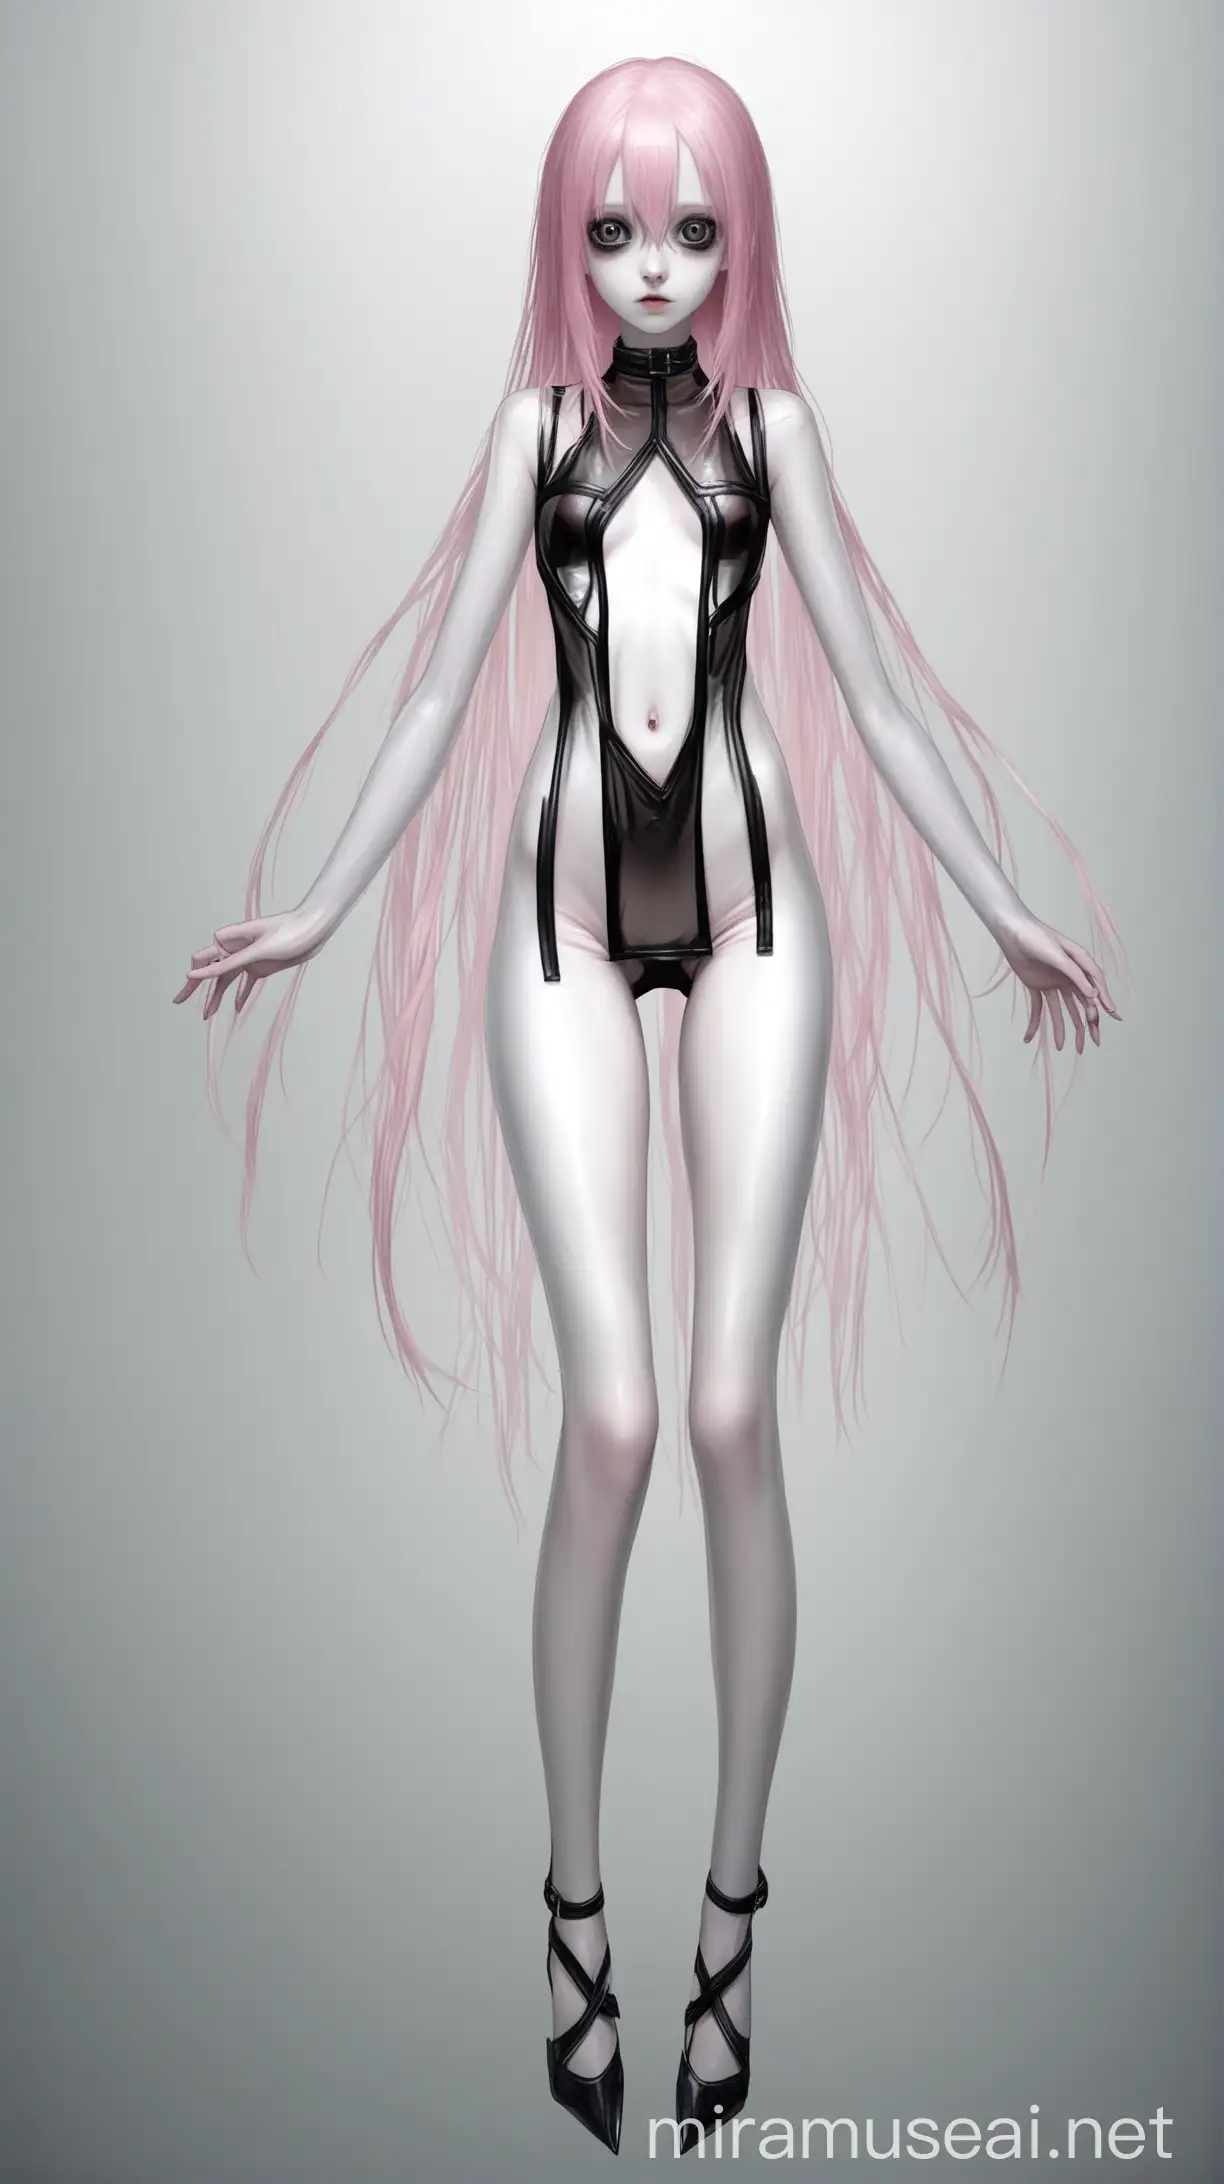 Pale Girl with Pink Hair in Transparent Clothing and Wet Hair